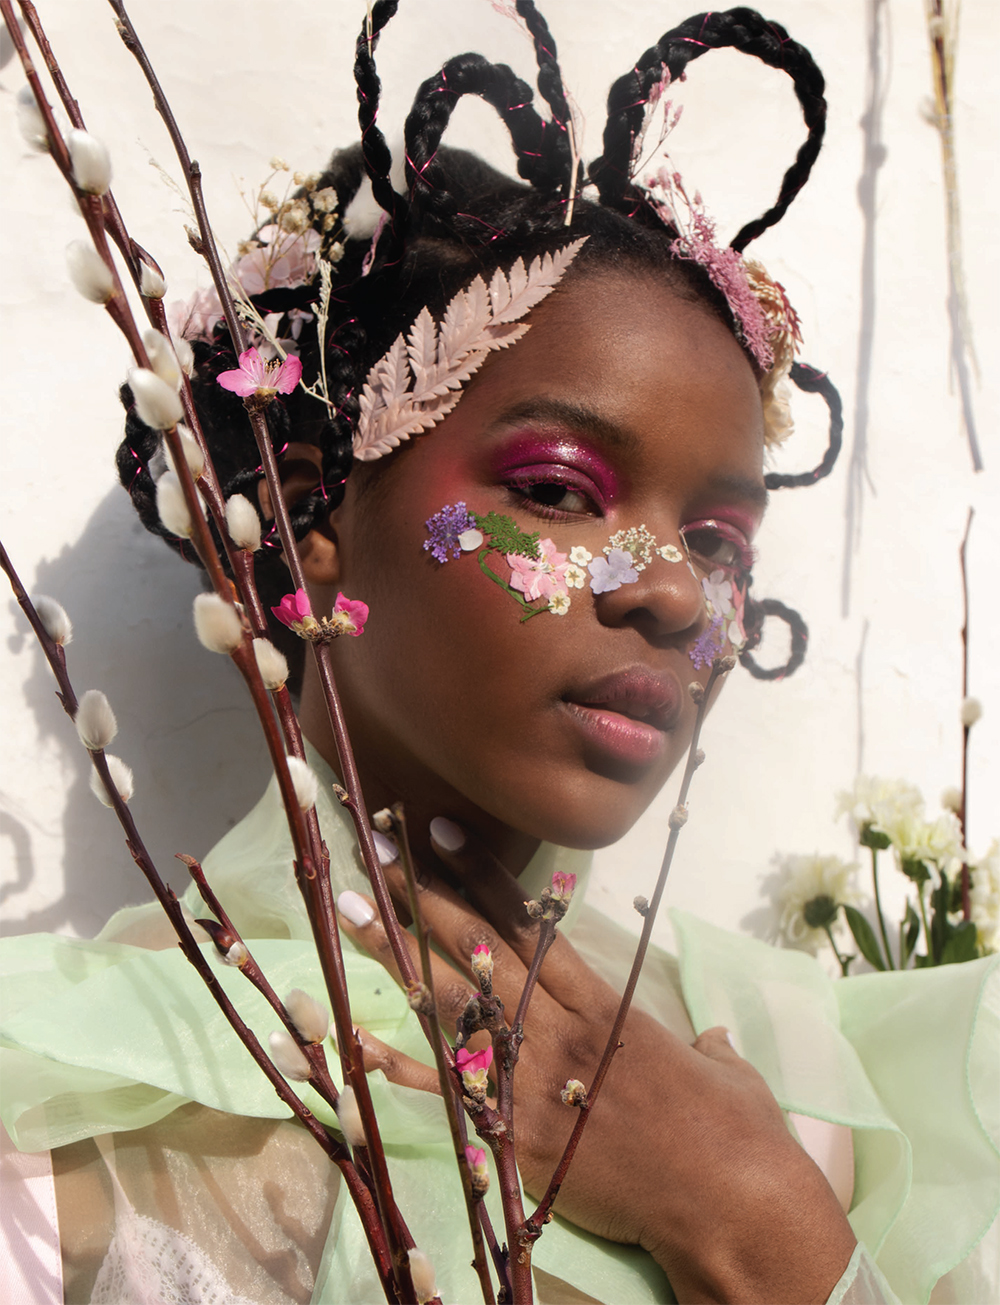 Image shows model with braids, and floral make-up looking into camera